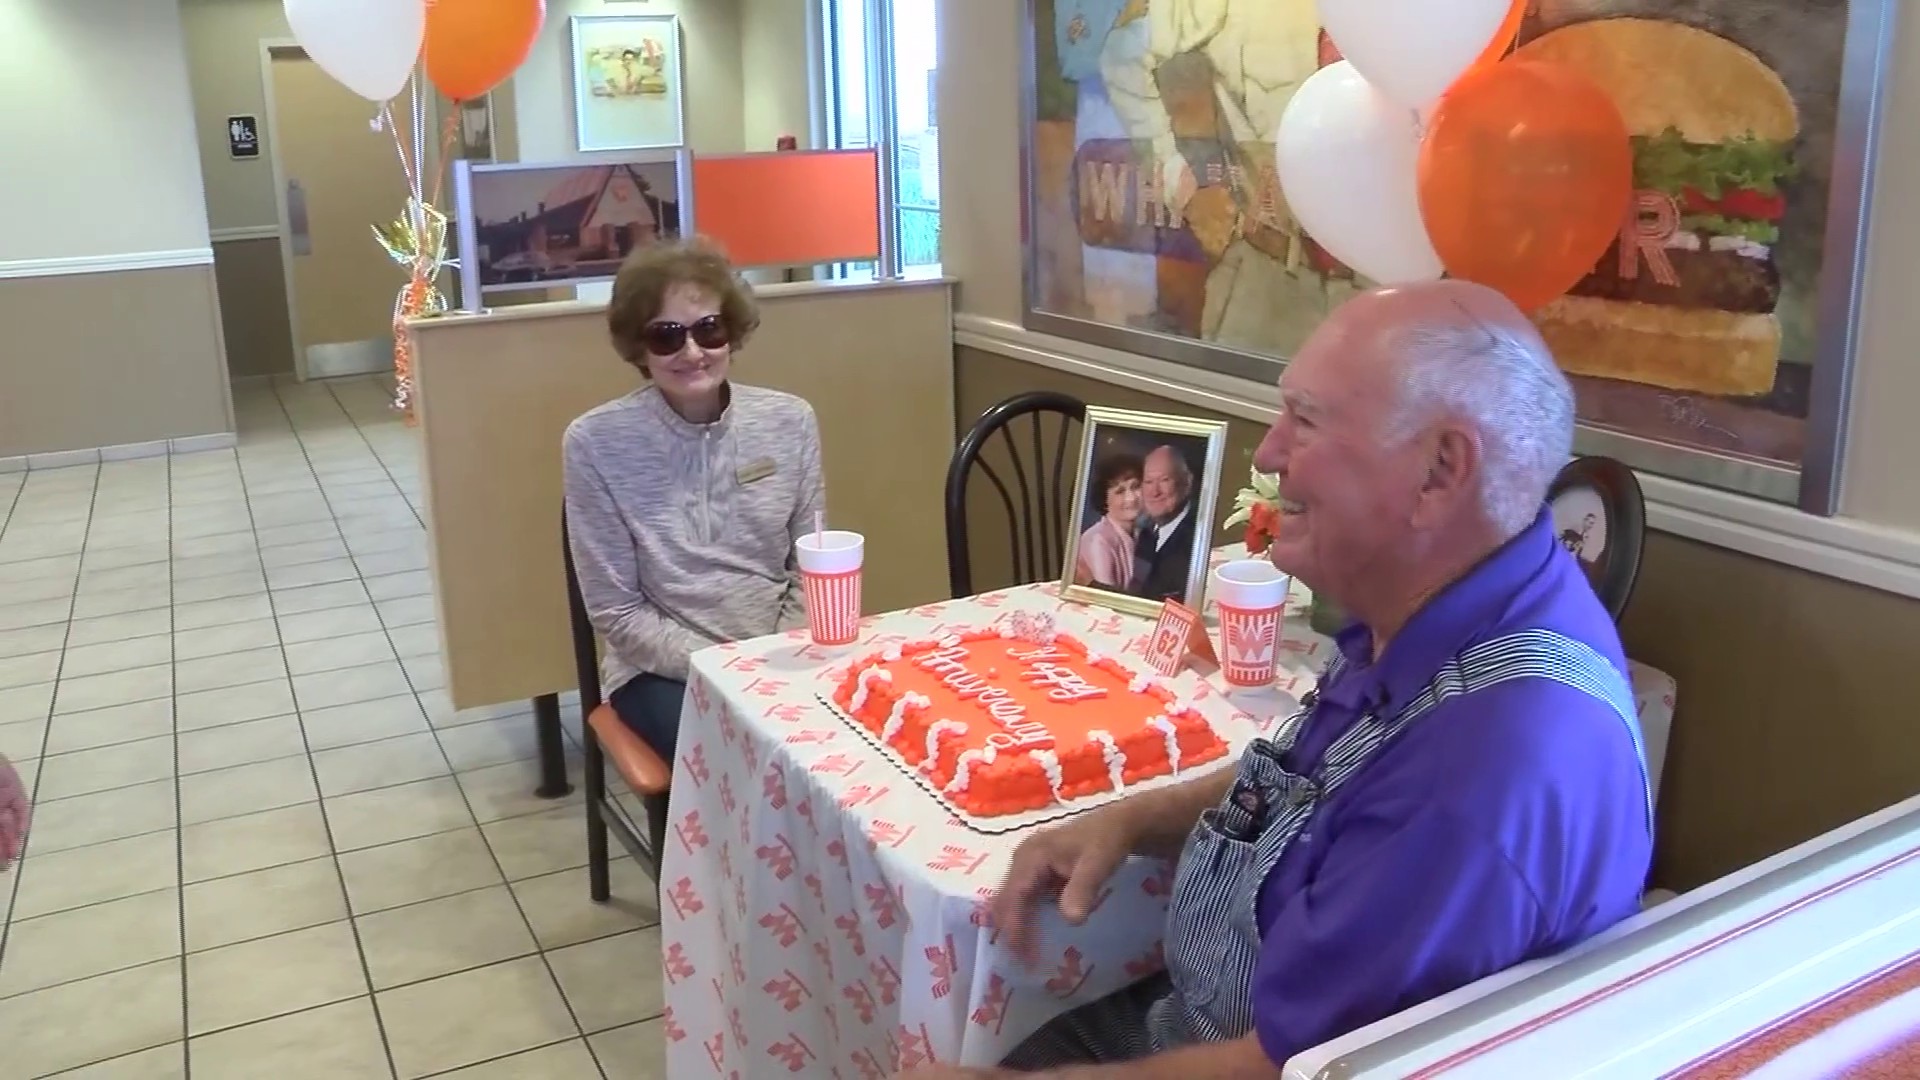 What-a-couple' gets Whataburger surprise for 62nd anniversary